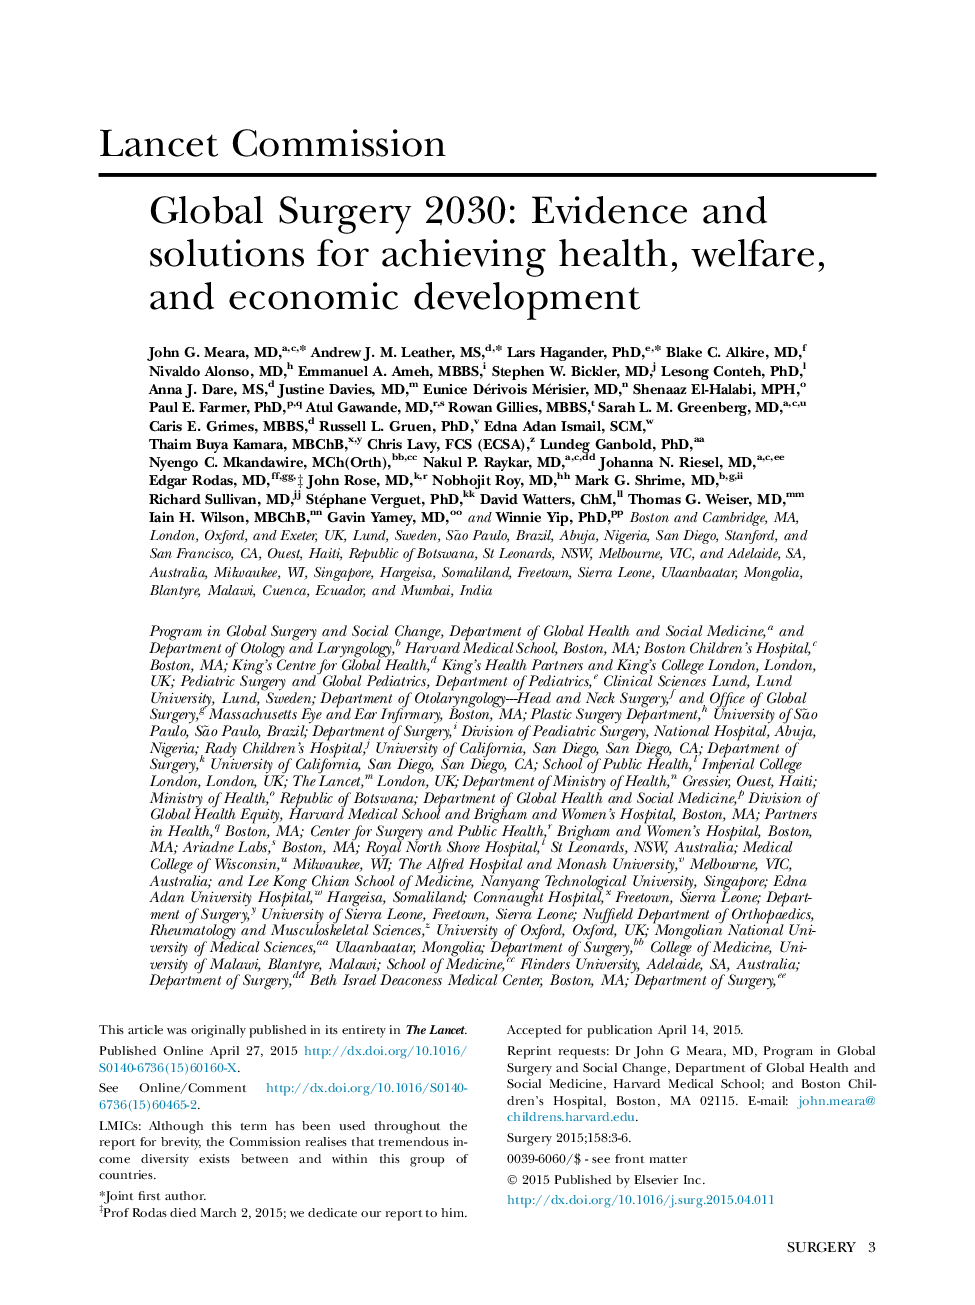 Global Surgery 2030: Evidence and solutions for achieving health, welfare, and economic development